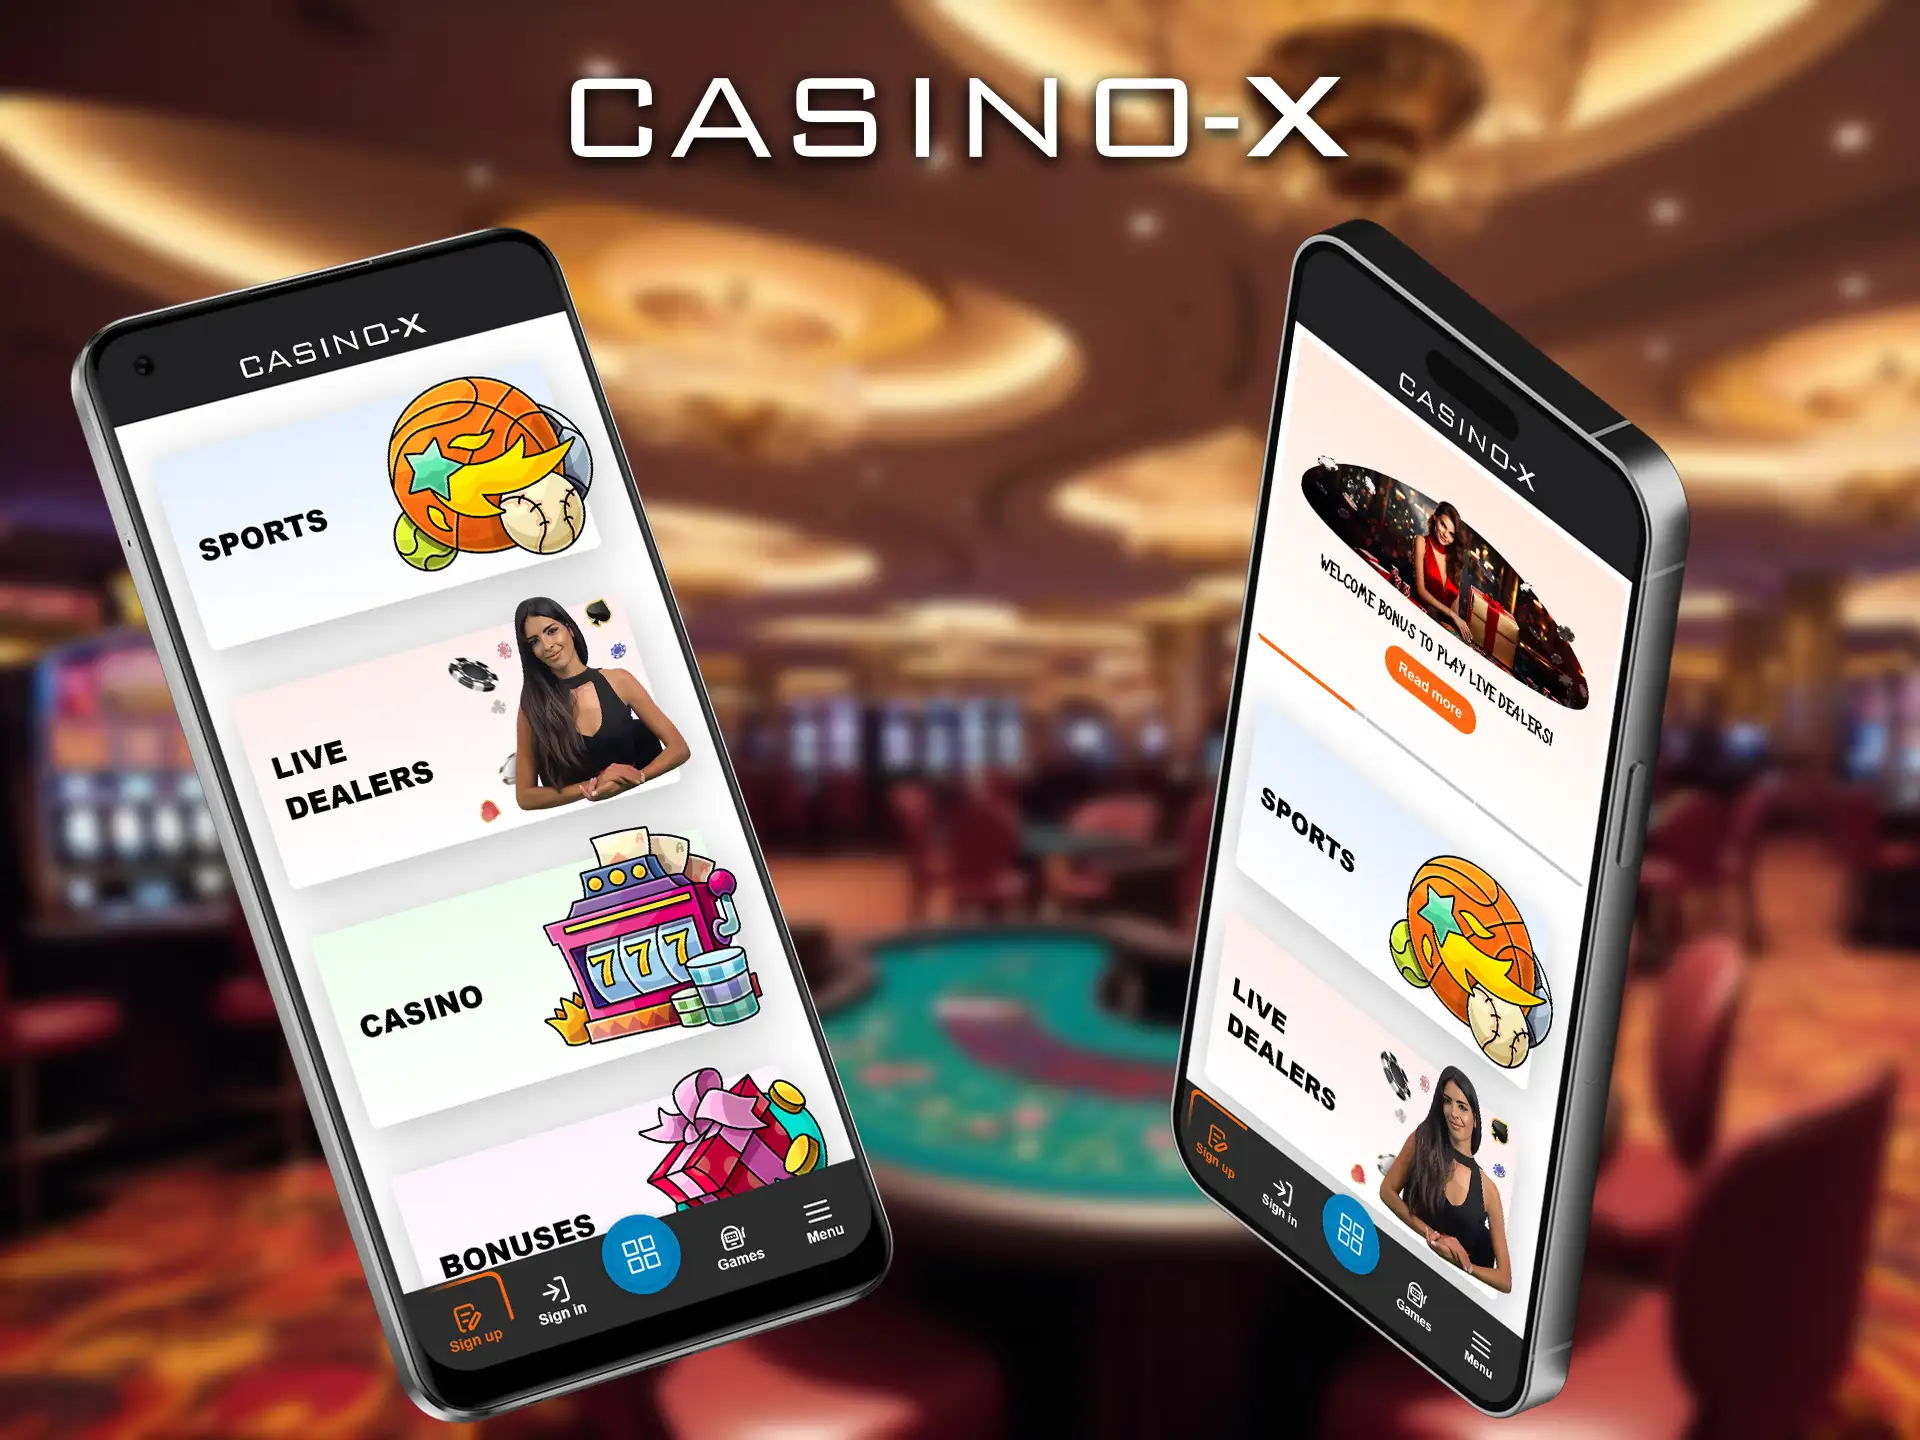 Download the Casino-X mobile app for Android or iOS and play your favorite games anytime, anywhere